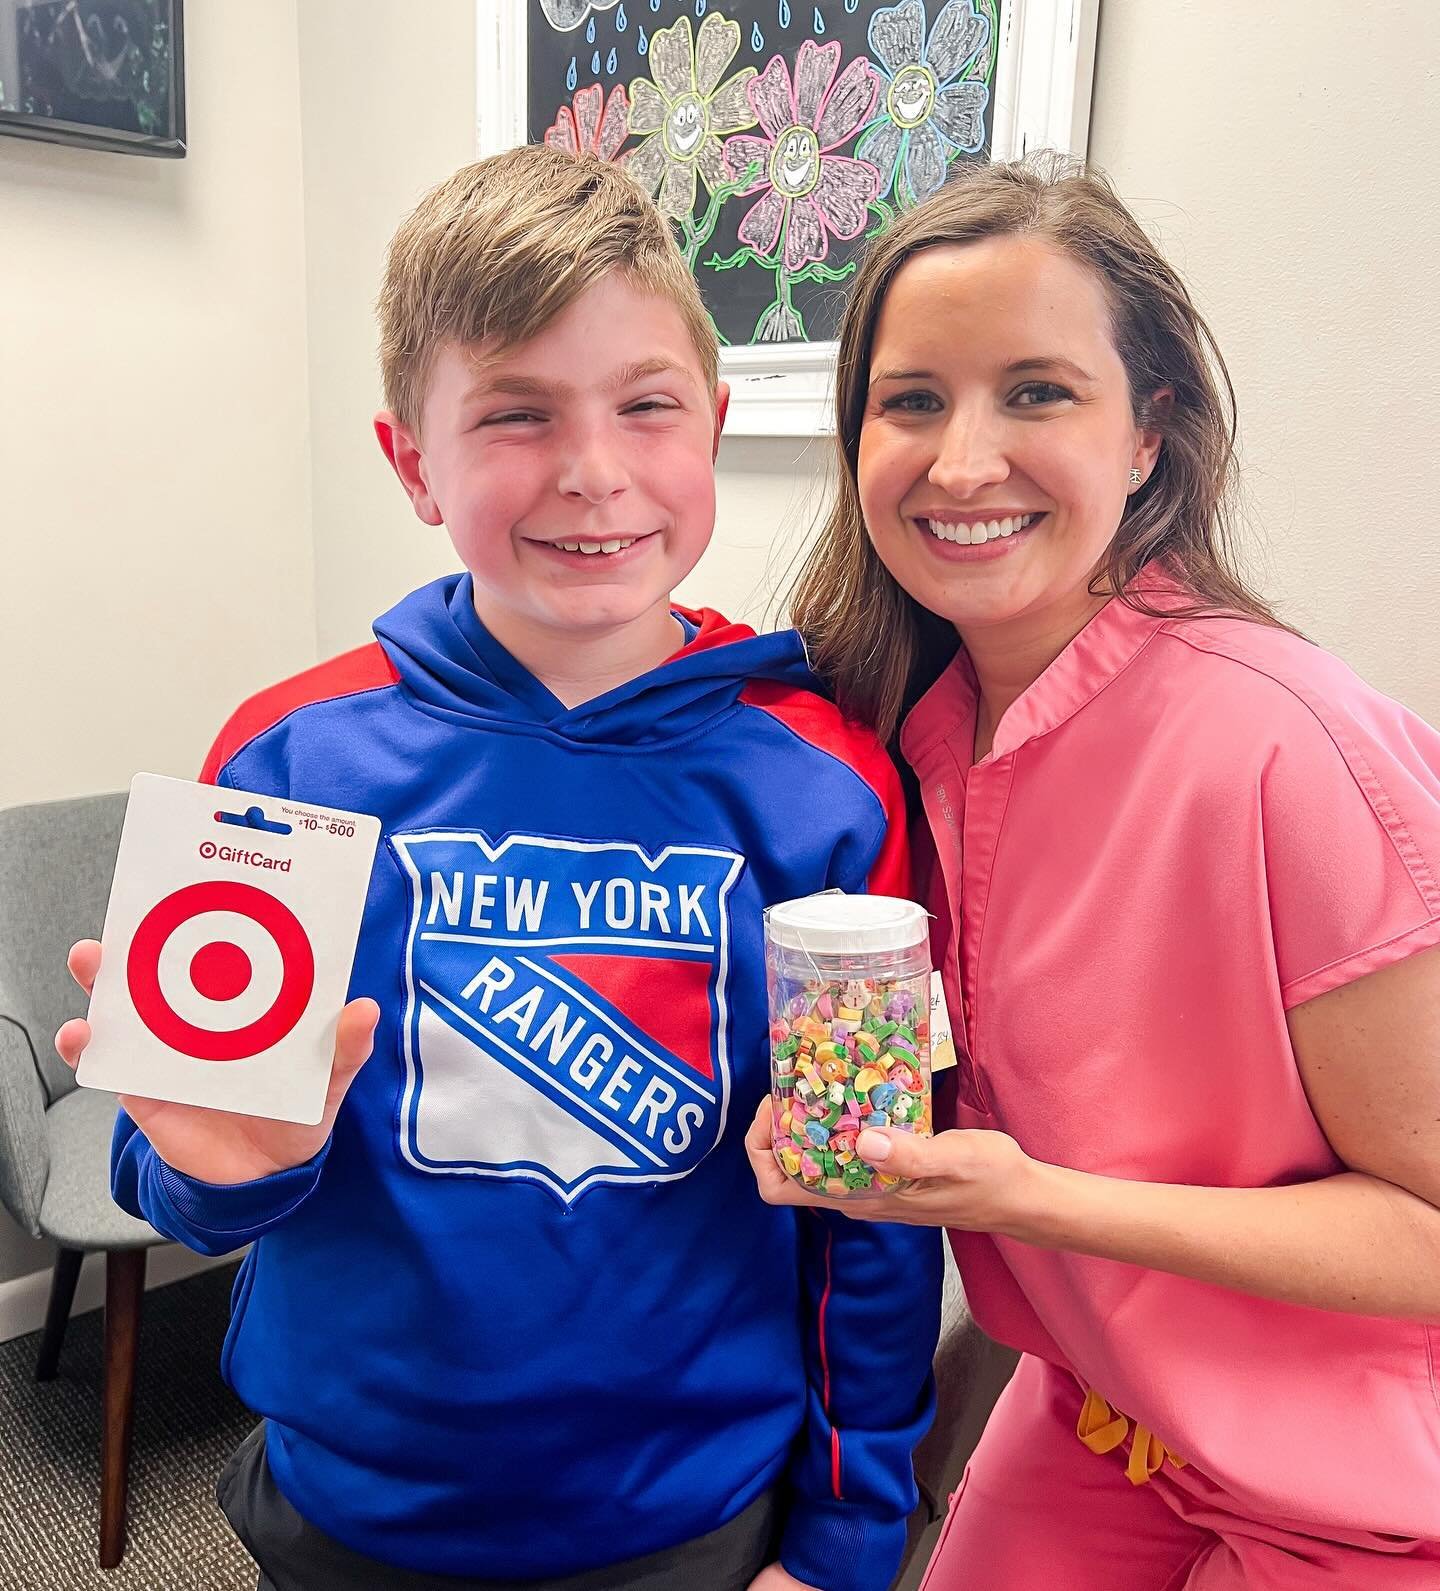 Lucas was our spring contest winner!! 297 erasers were in the jar and he guessed the exact number! Way to go Lucas! Happy Shopping! #hollywoodsmiles #hollywoodstars #npd #nutleypediatricdentistry #targetgiftcard